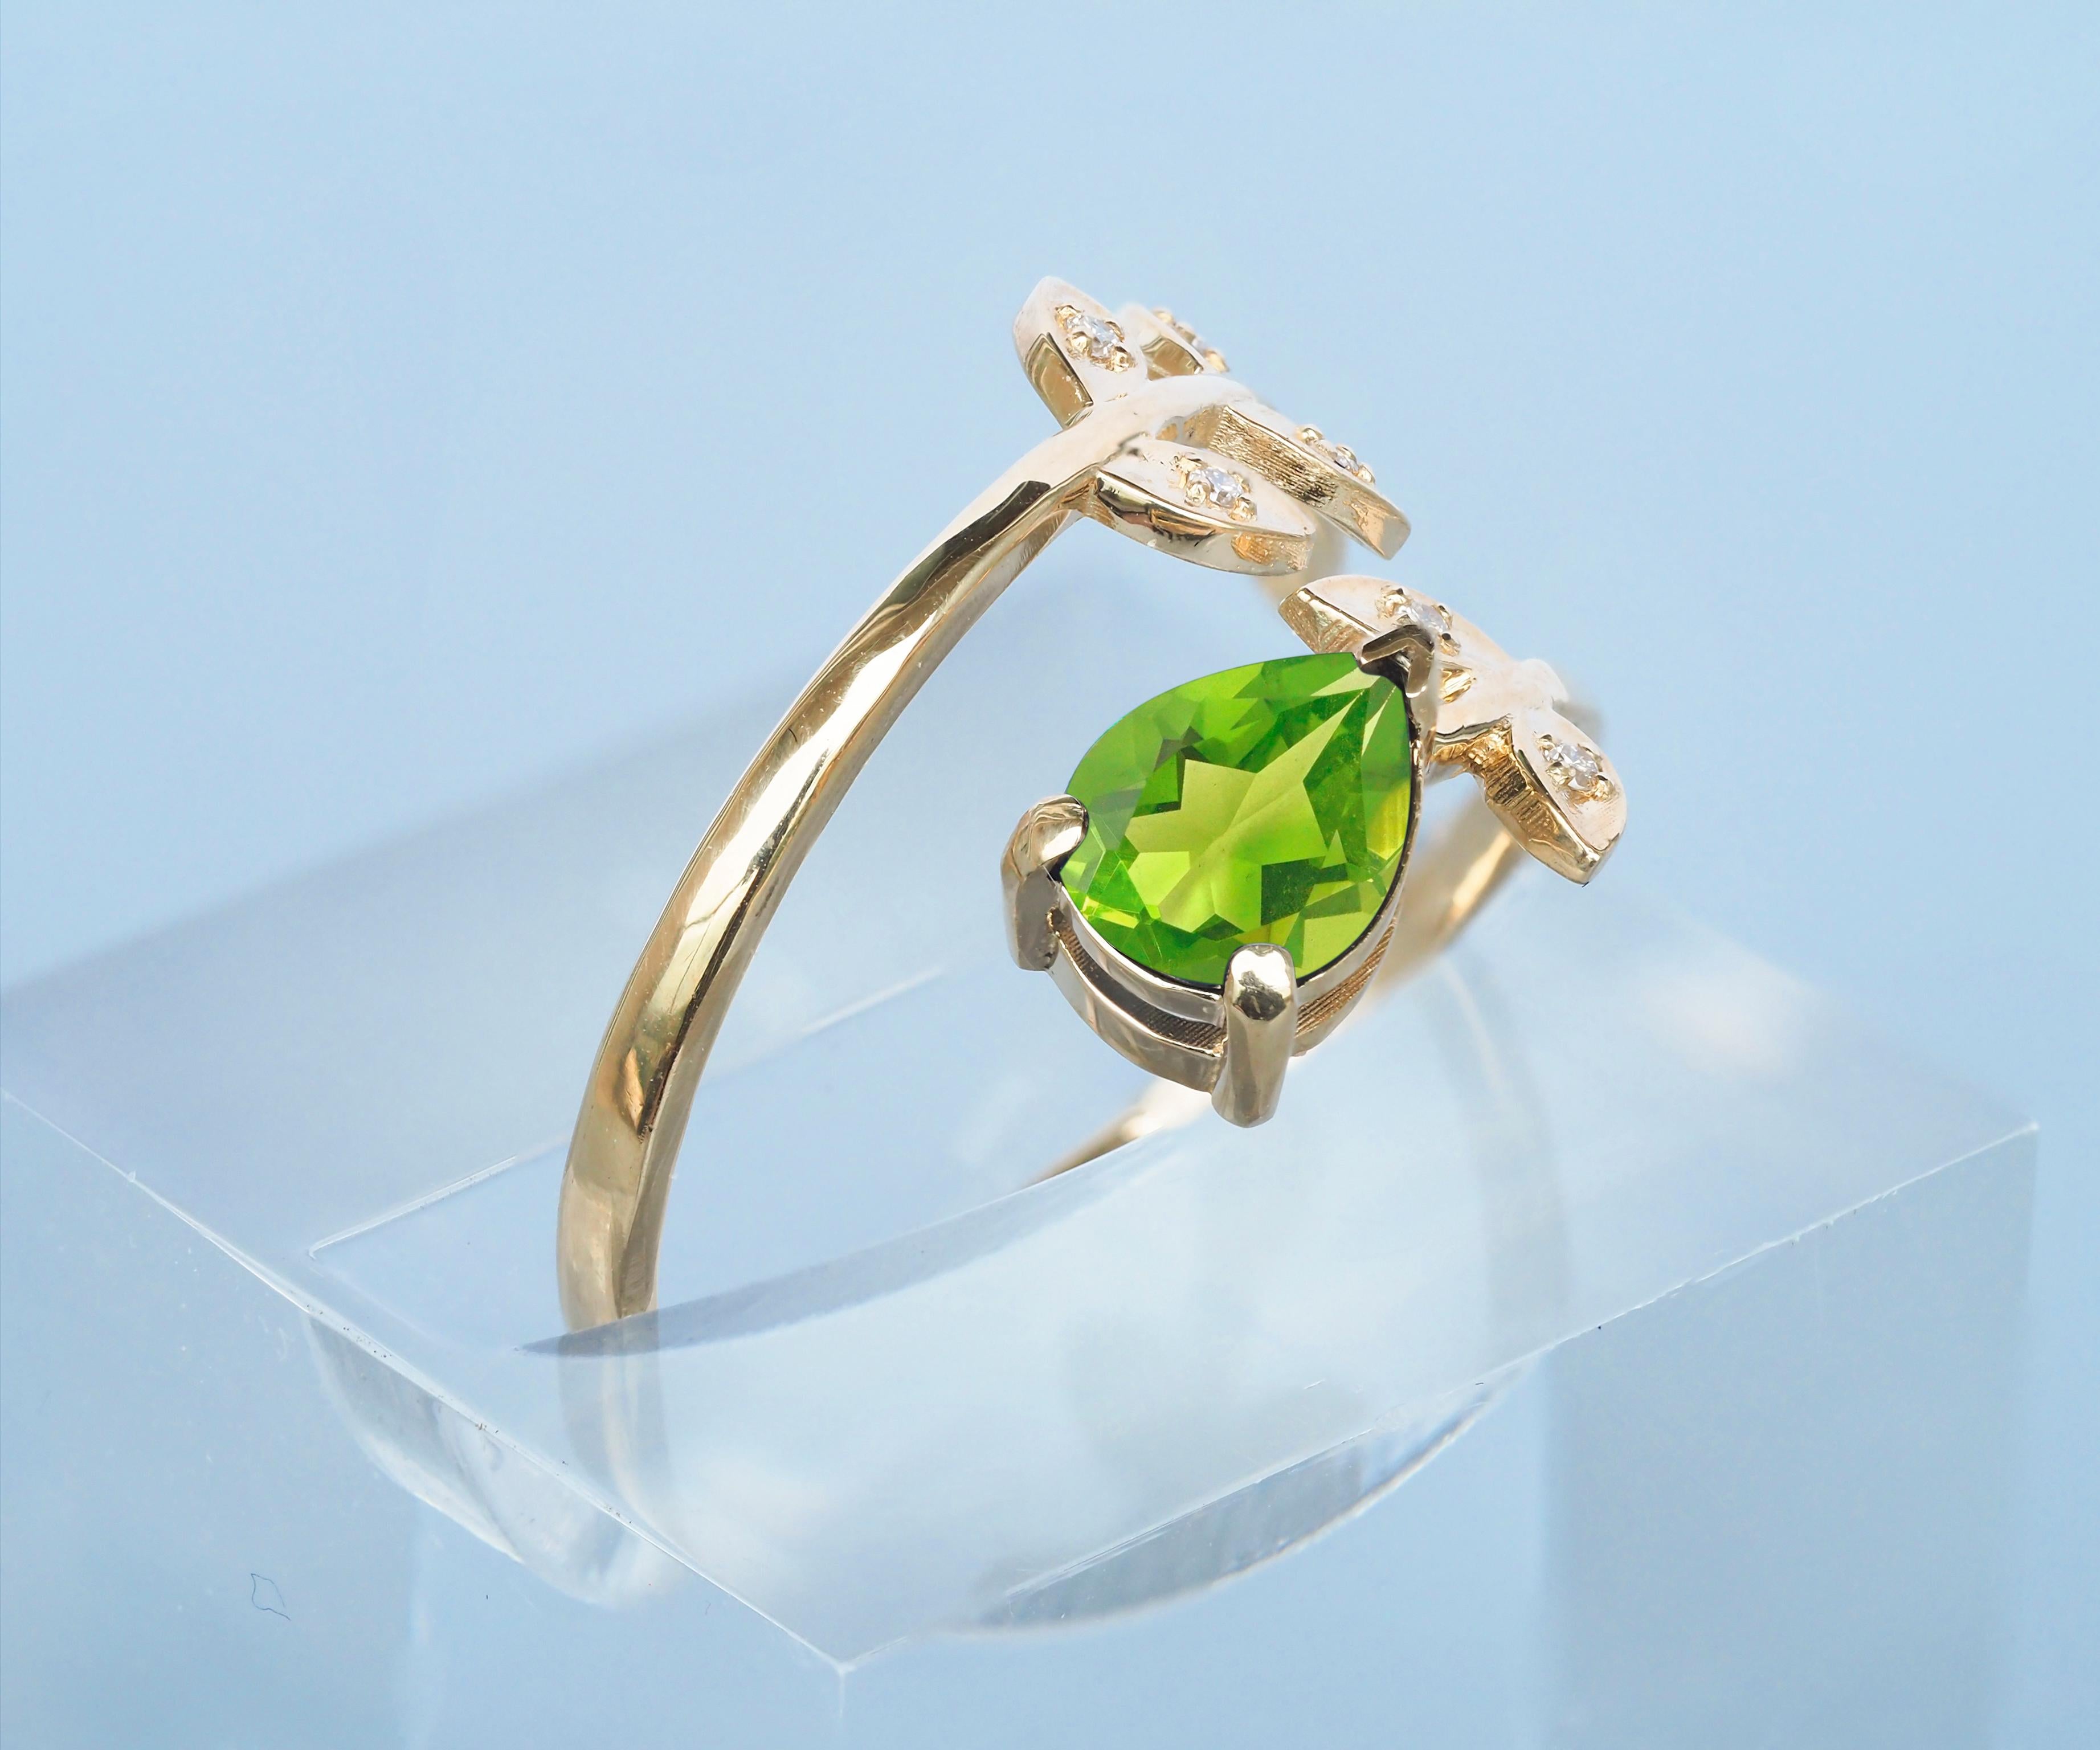 Women's August birthstone peridot 14k gold ring. For Sale